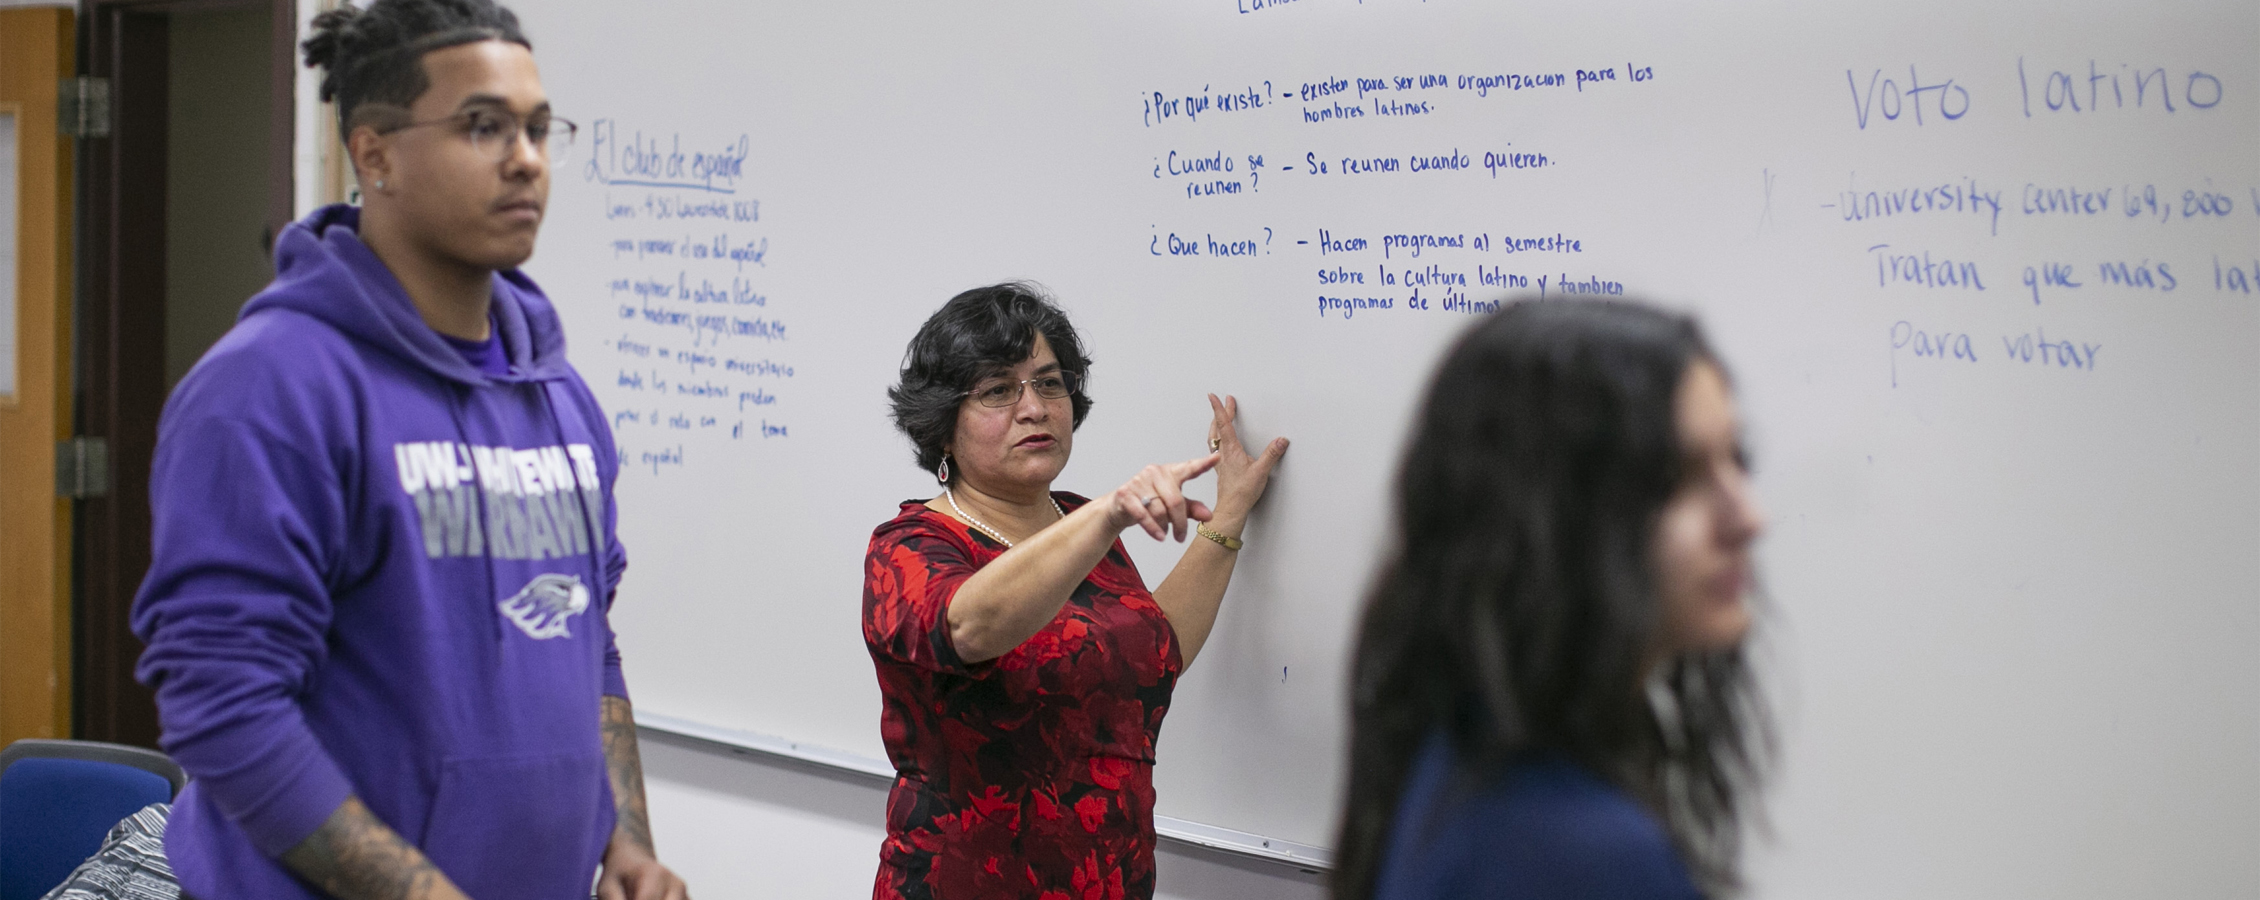 A Spanish faculty member directs students at a whiteboard.